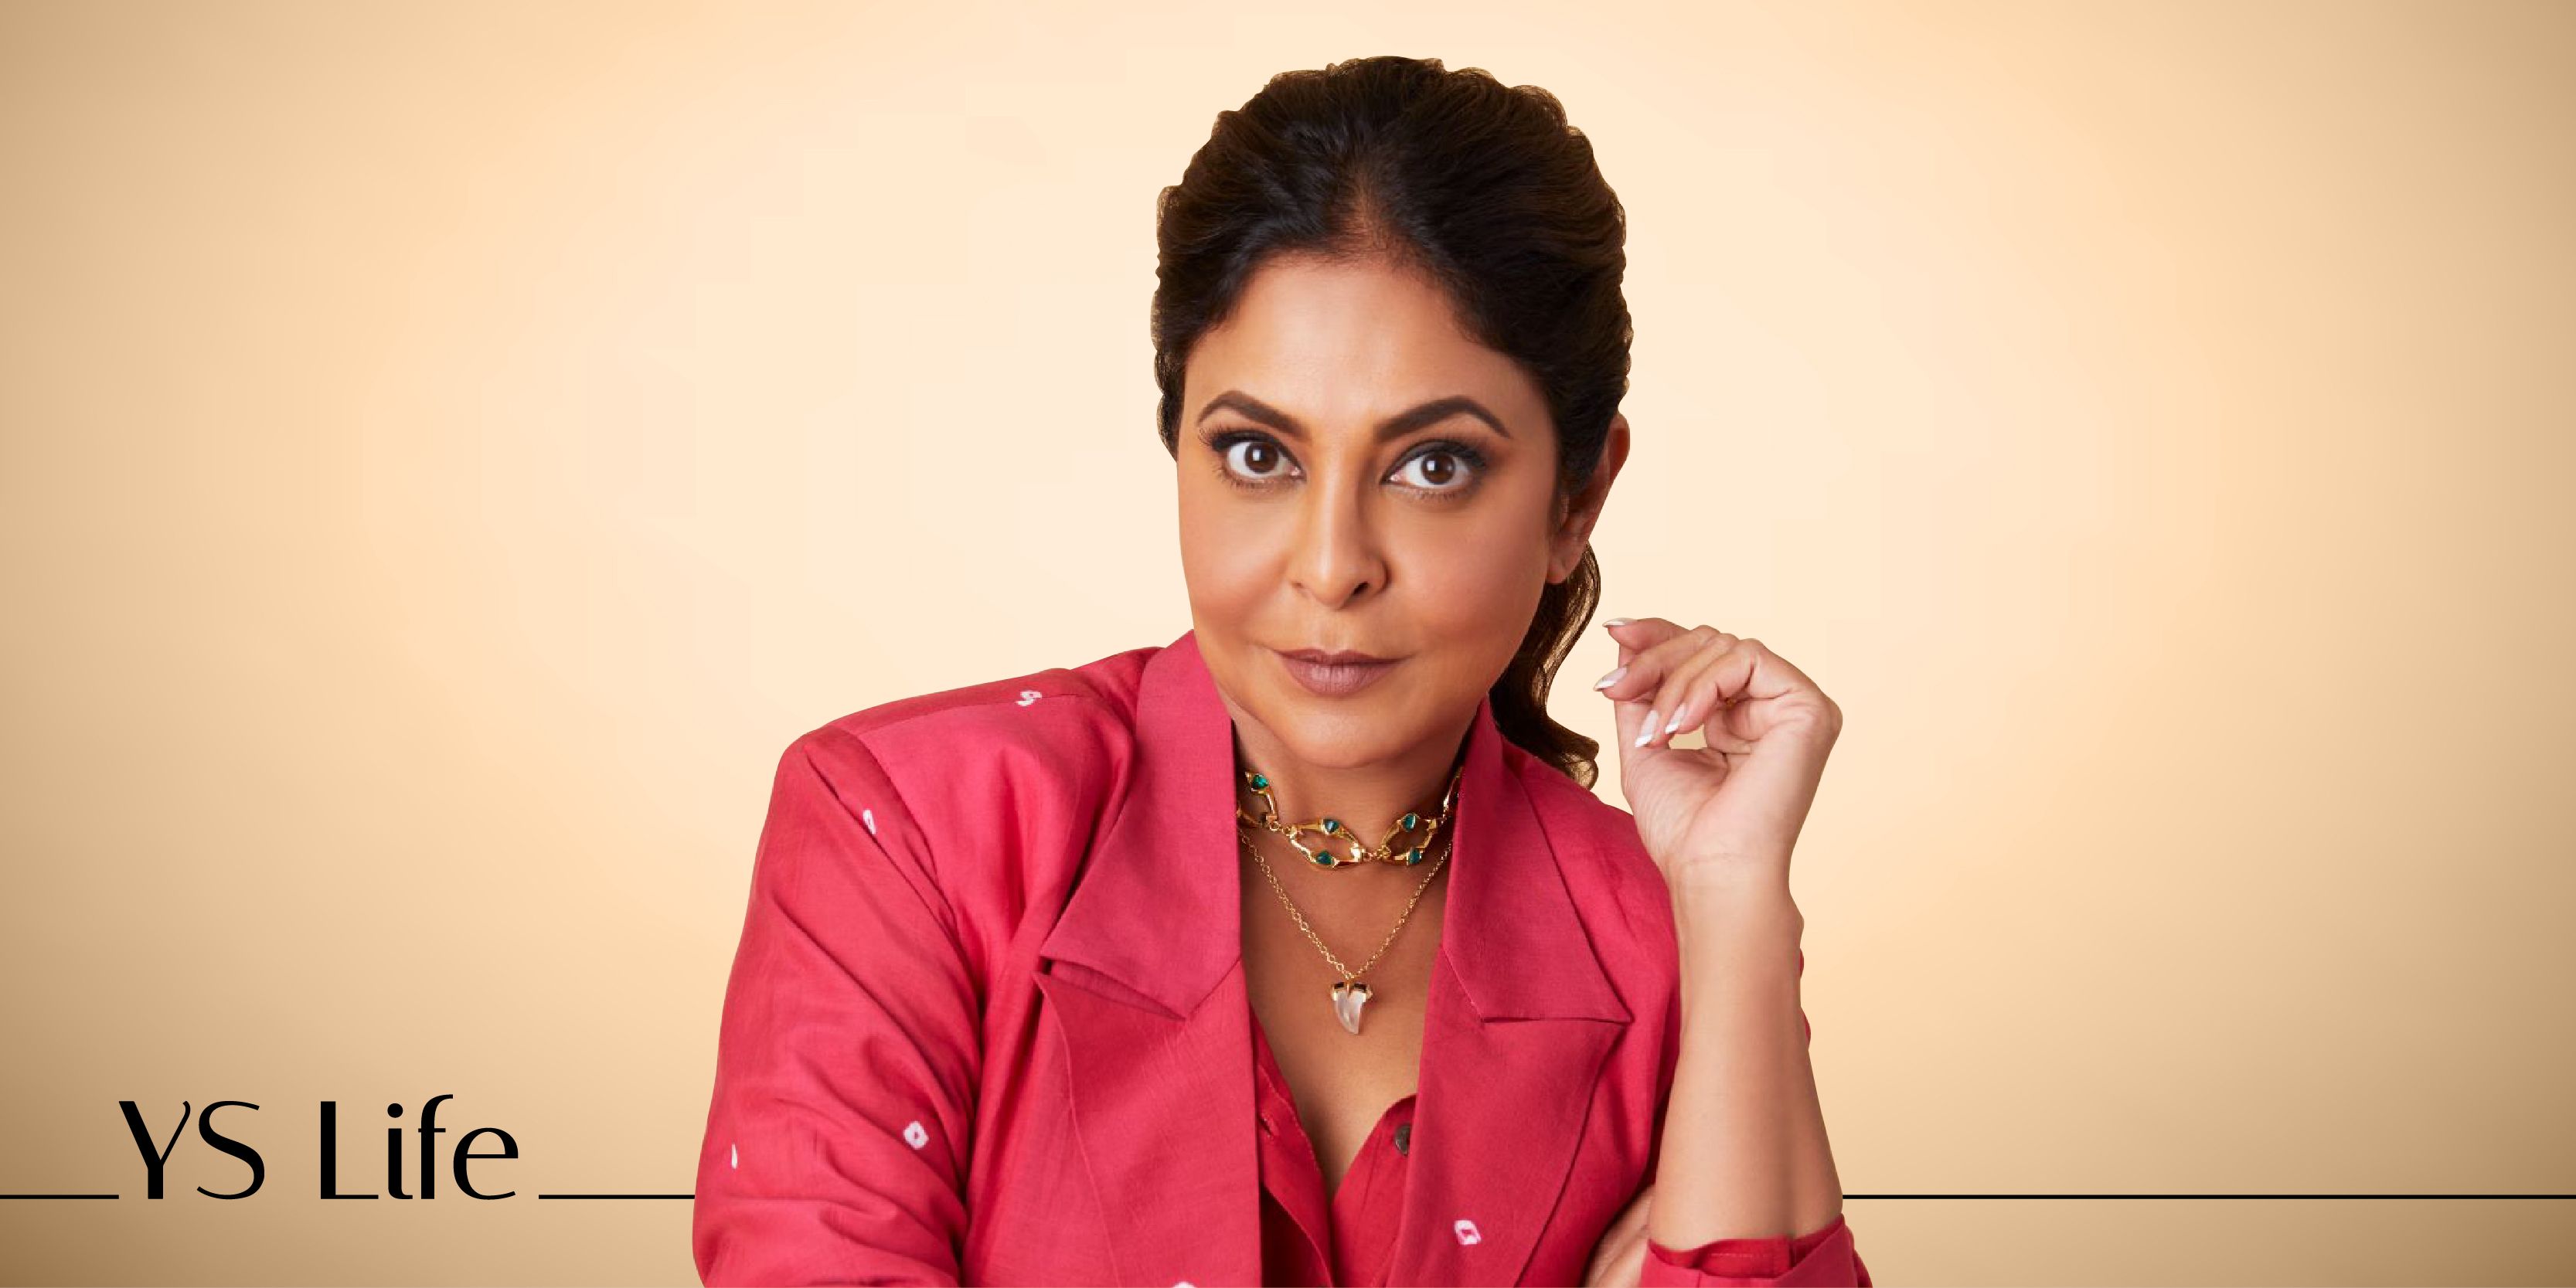 Actor Shefali Shah on why digital safety is vital for children